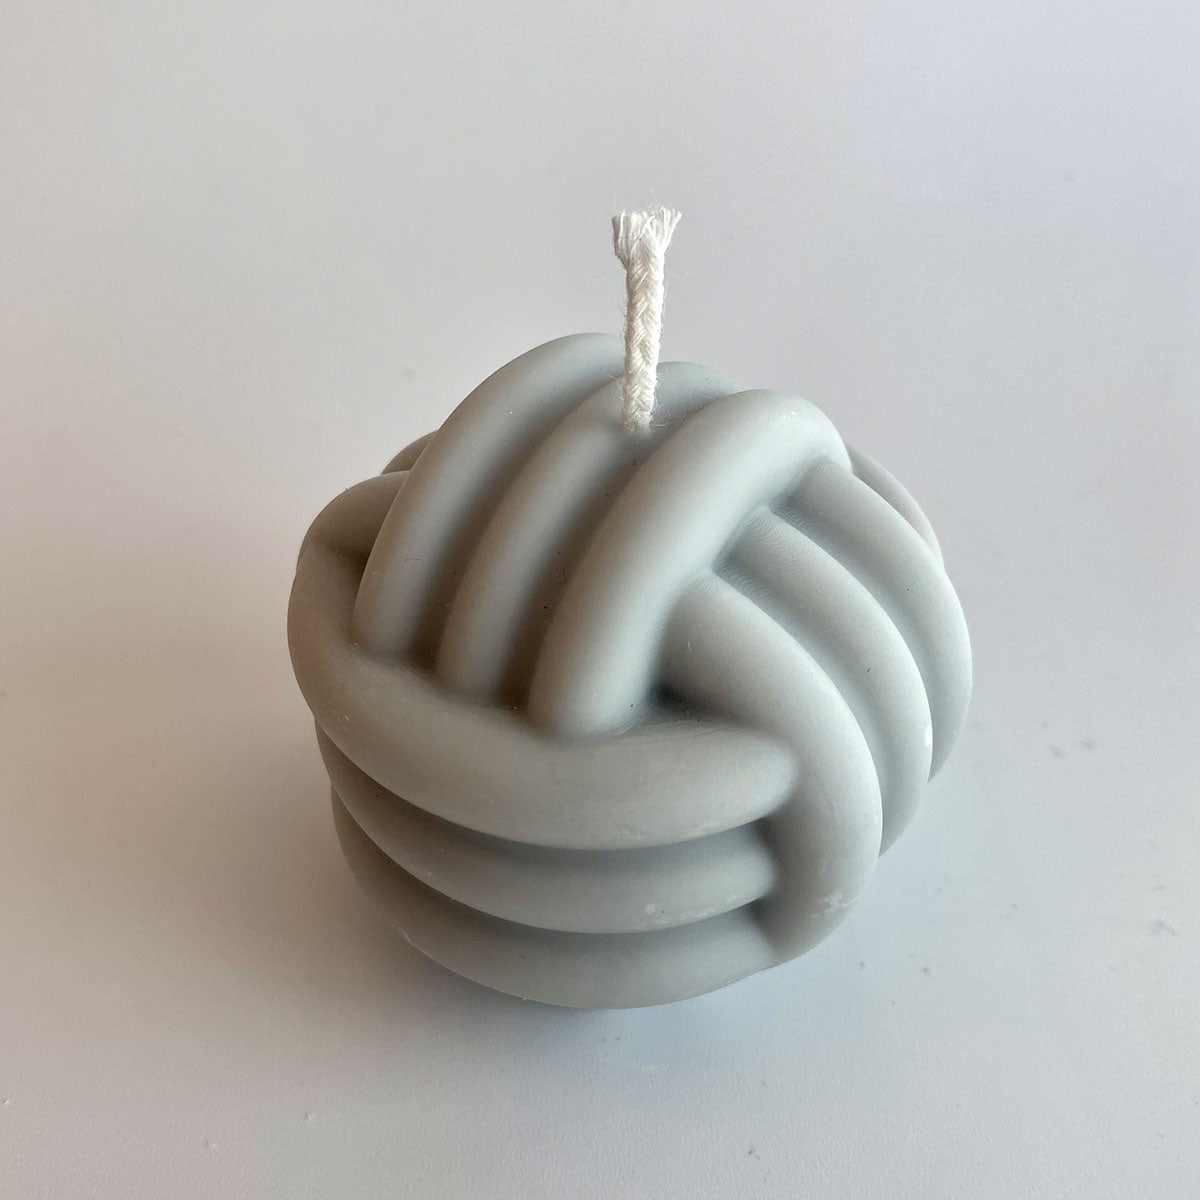 Monkey’s Fist Knot Candle - Gray